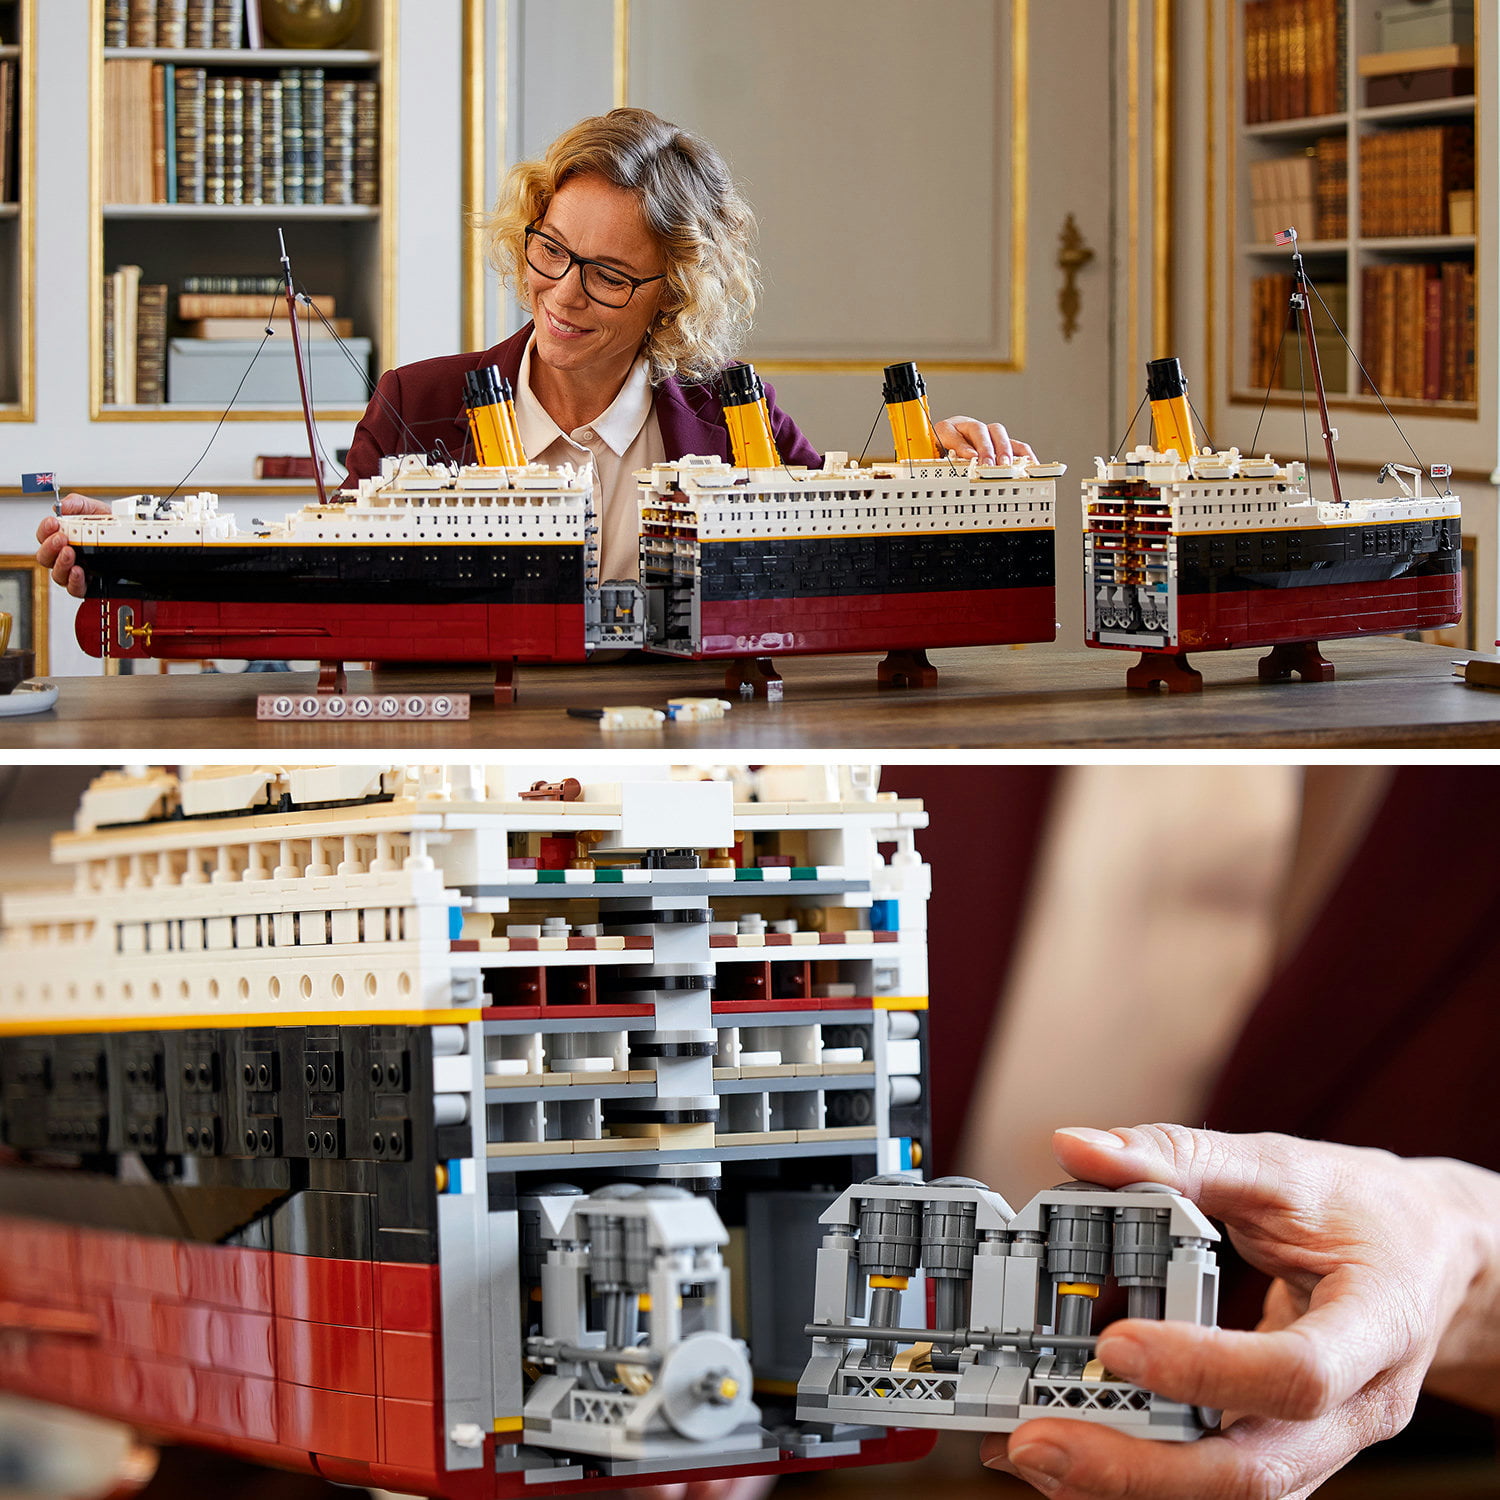 LEGO Titanic Building Set - 9090 Pieces (10294) New in hand RARE AWESOME ‼️  673419340335